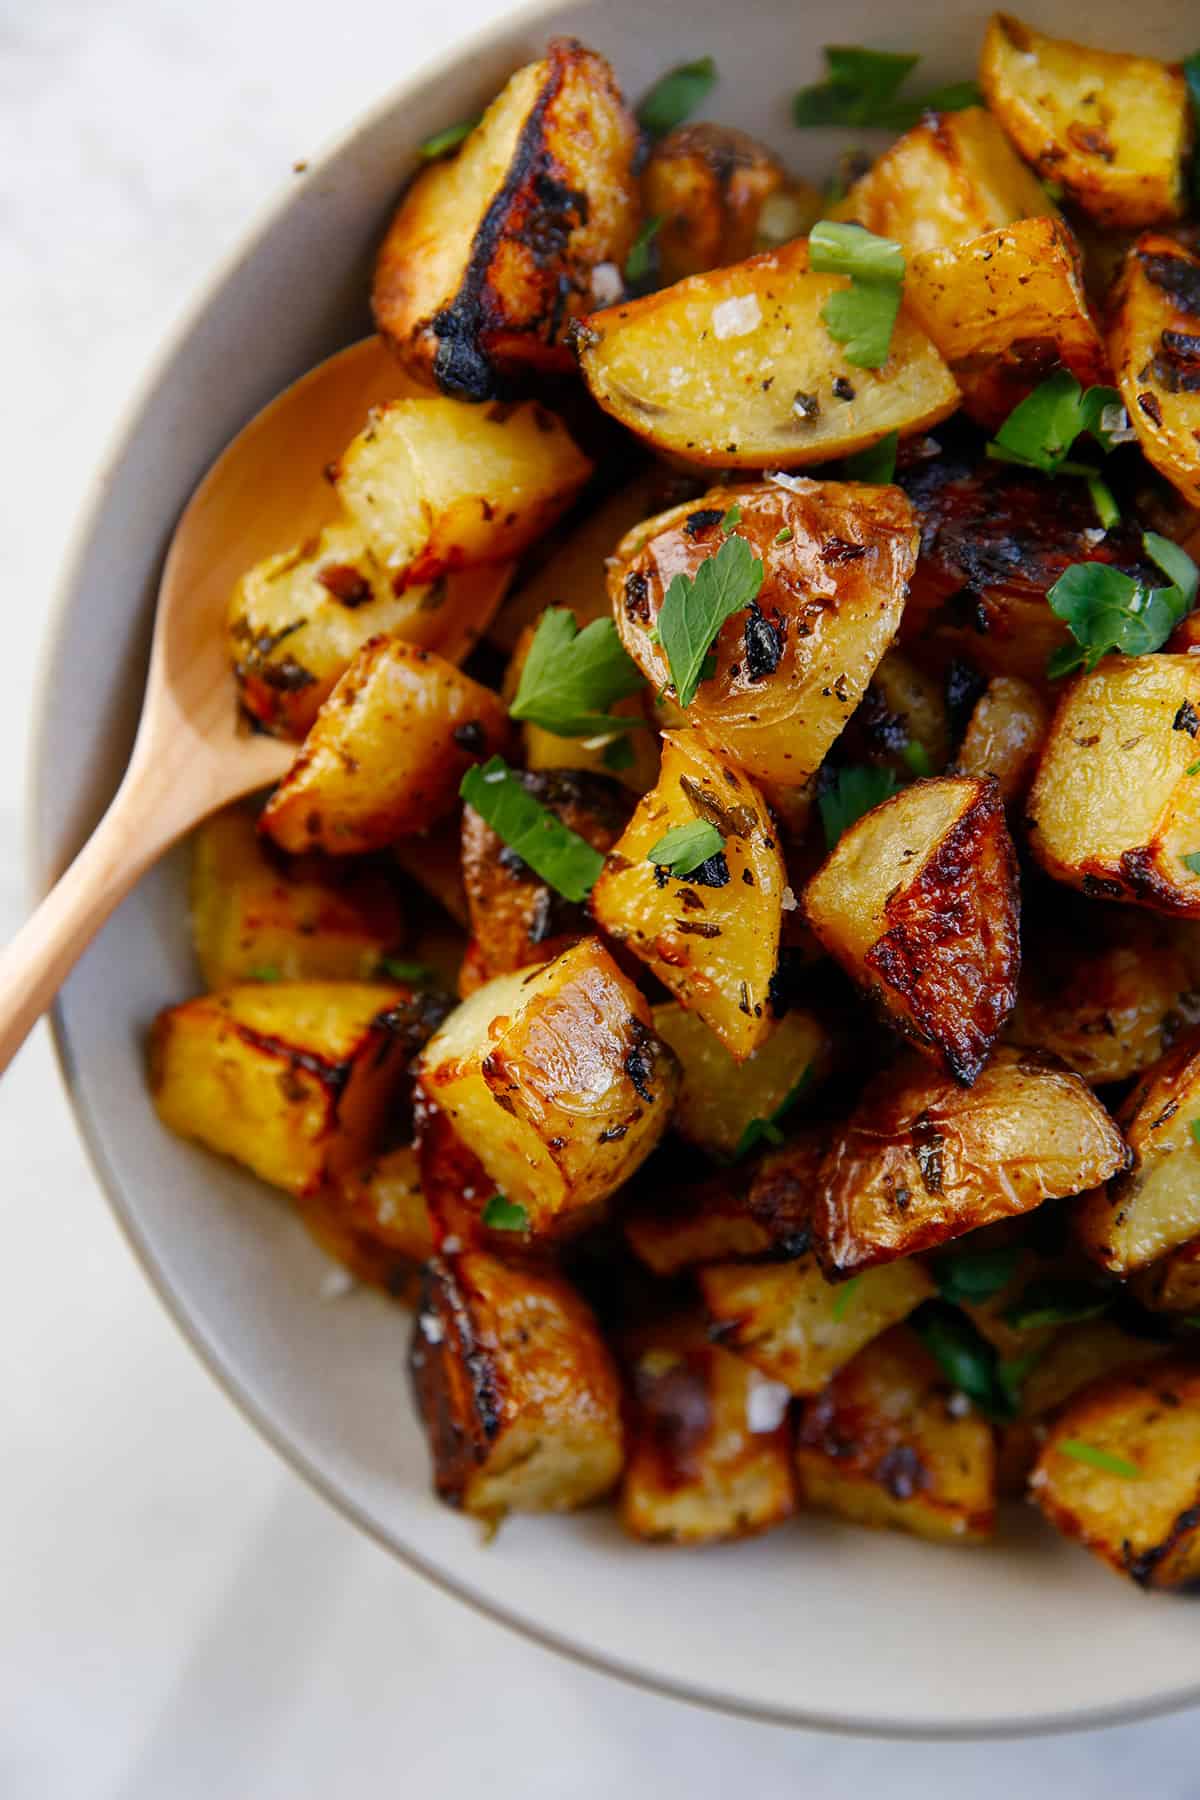 Spicy Roasted New Potatoes with Lemon & Herbs